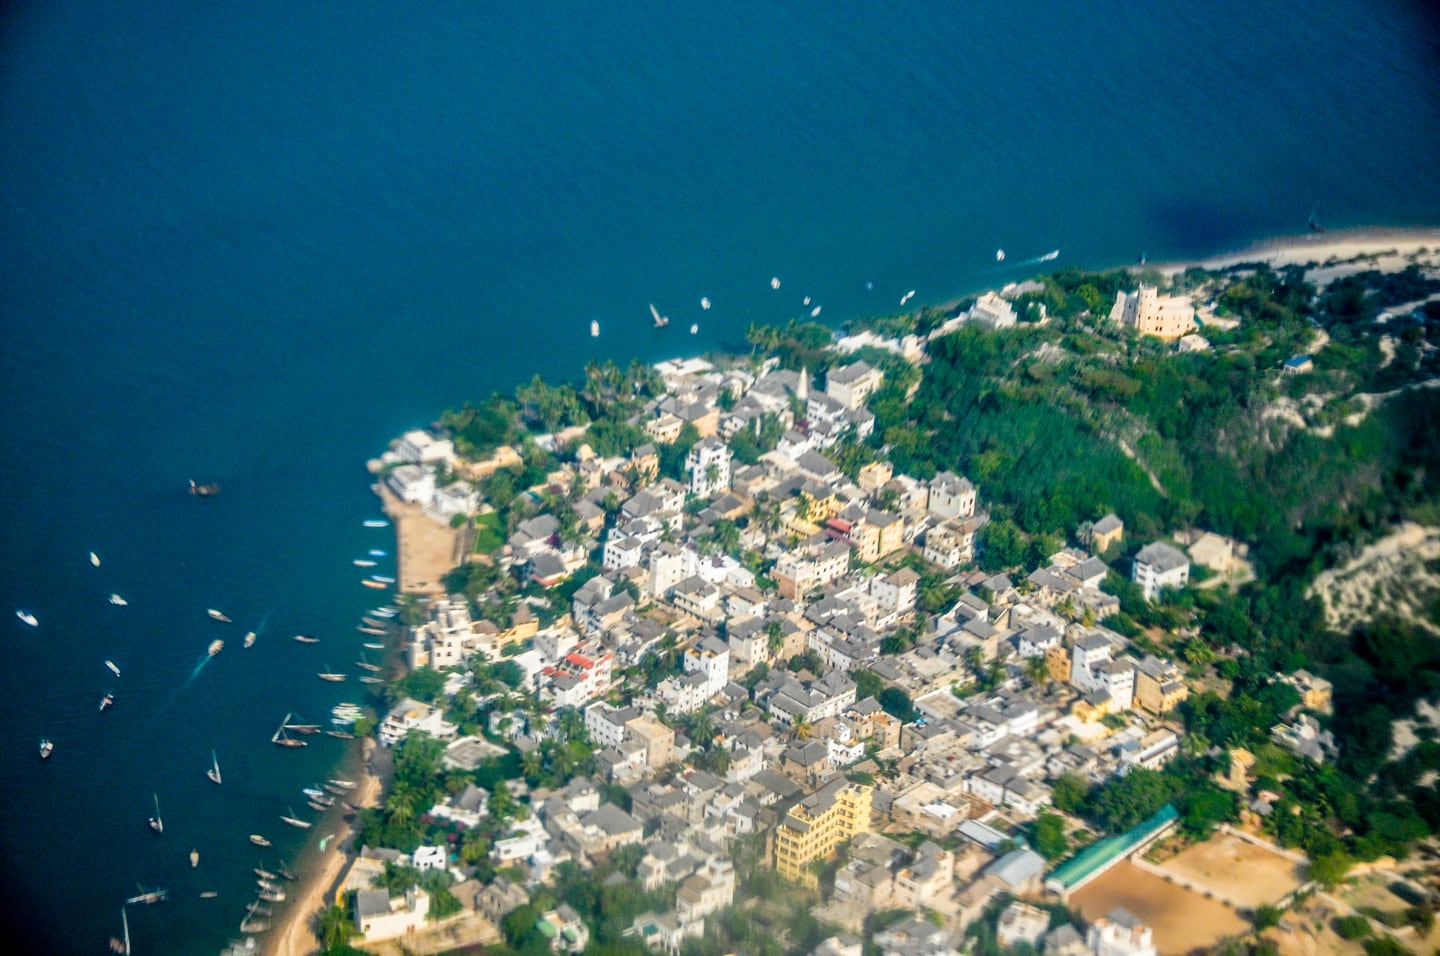 Lamu Town from the air